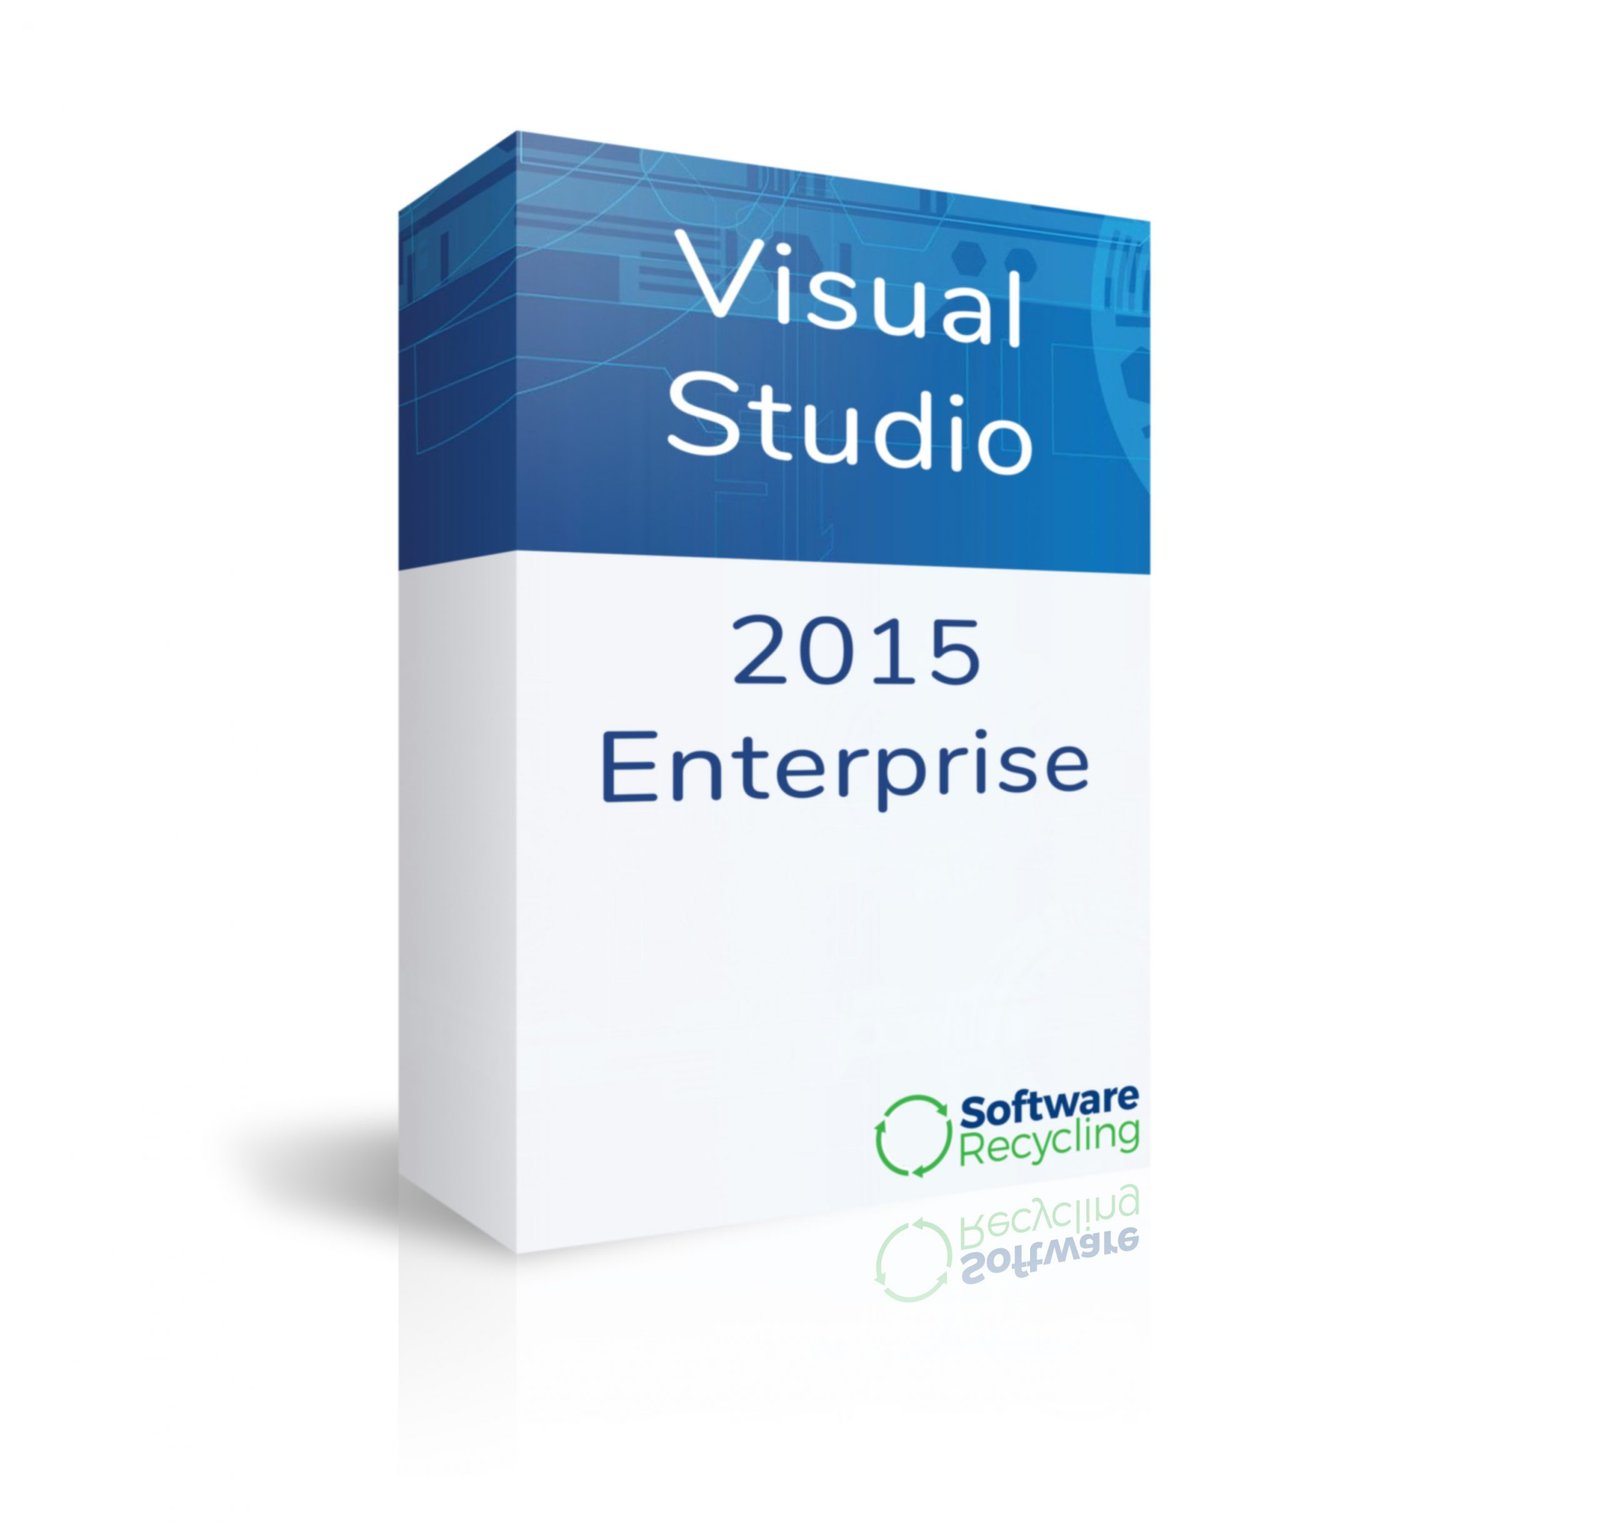 download what is difference between visual studio enterprise and professional